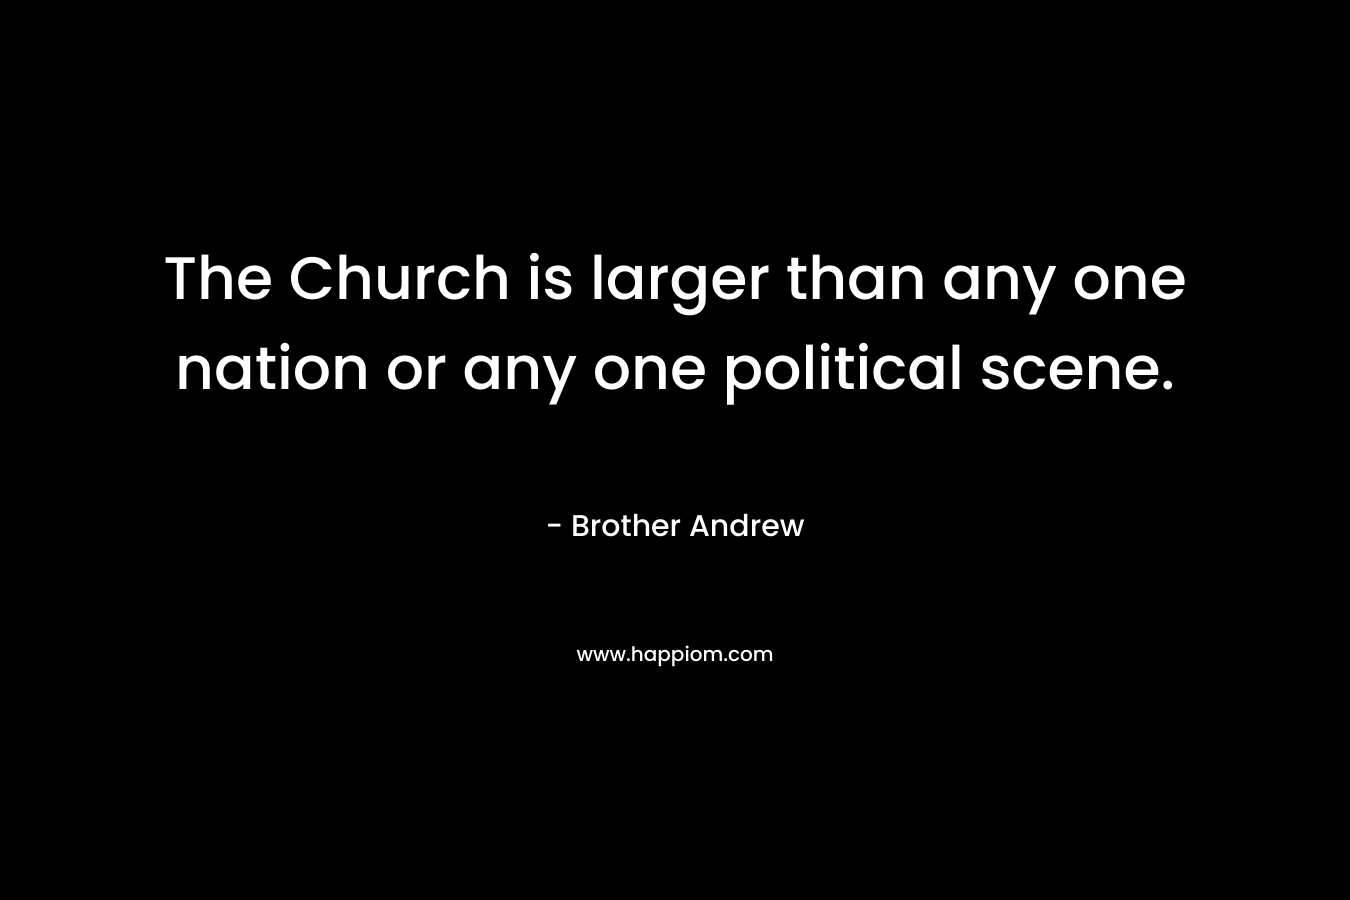 The Church is larger than any one nation or any one political scene. – Brother Andrew